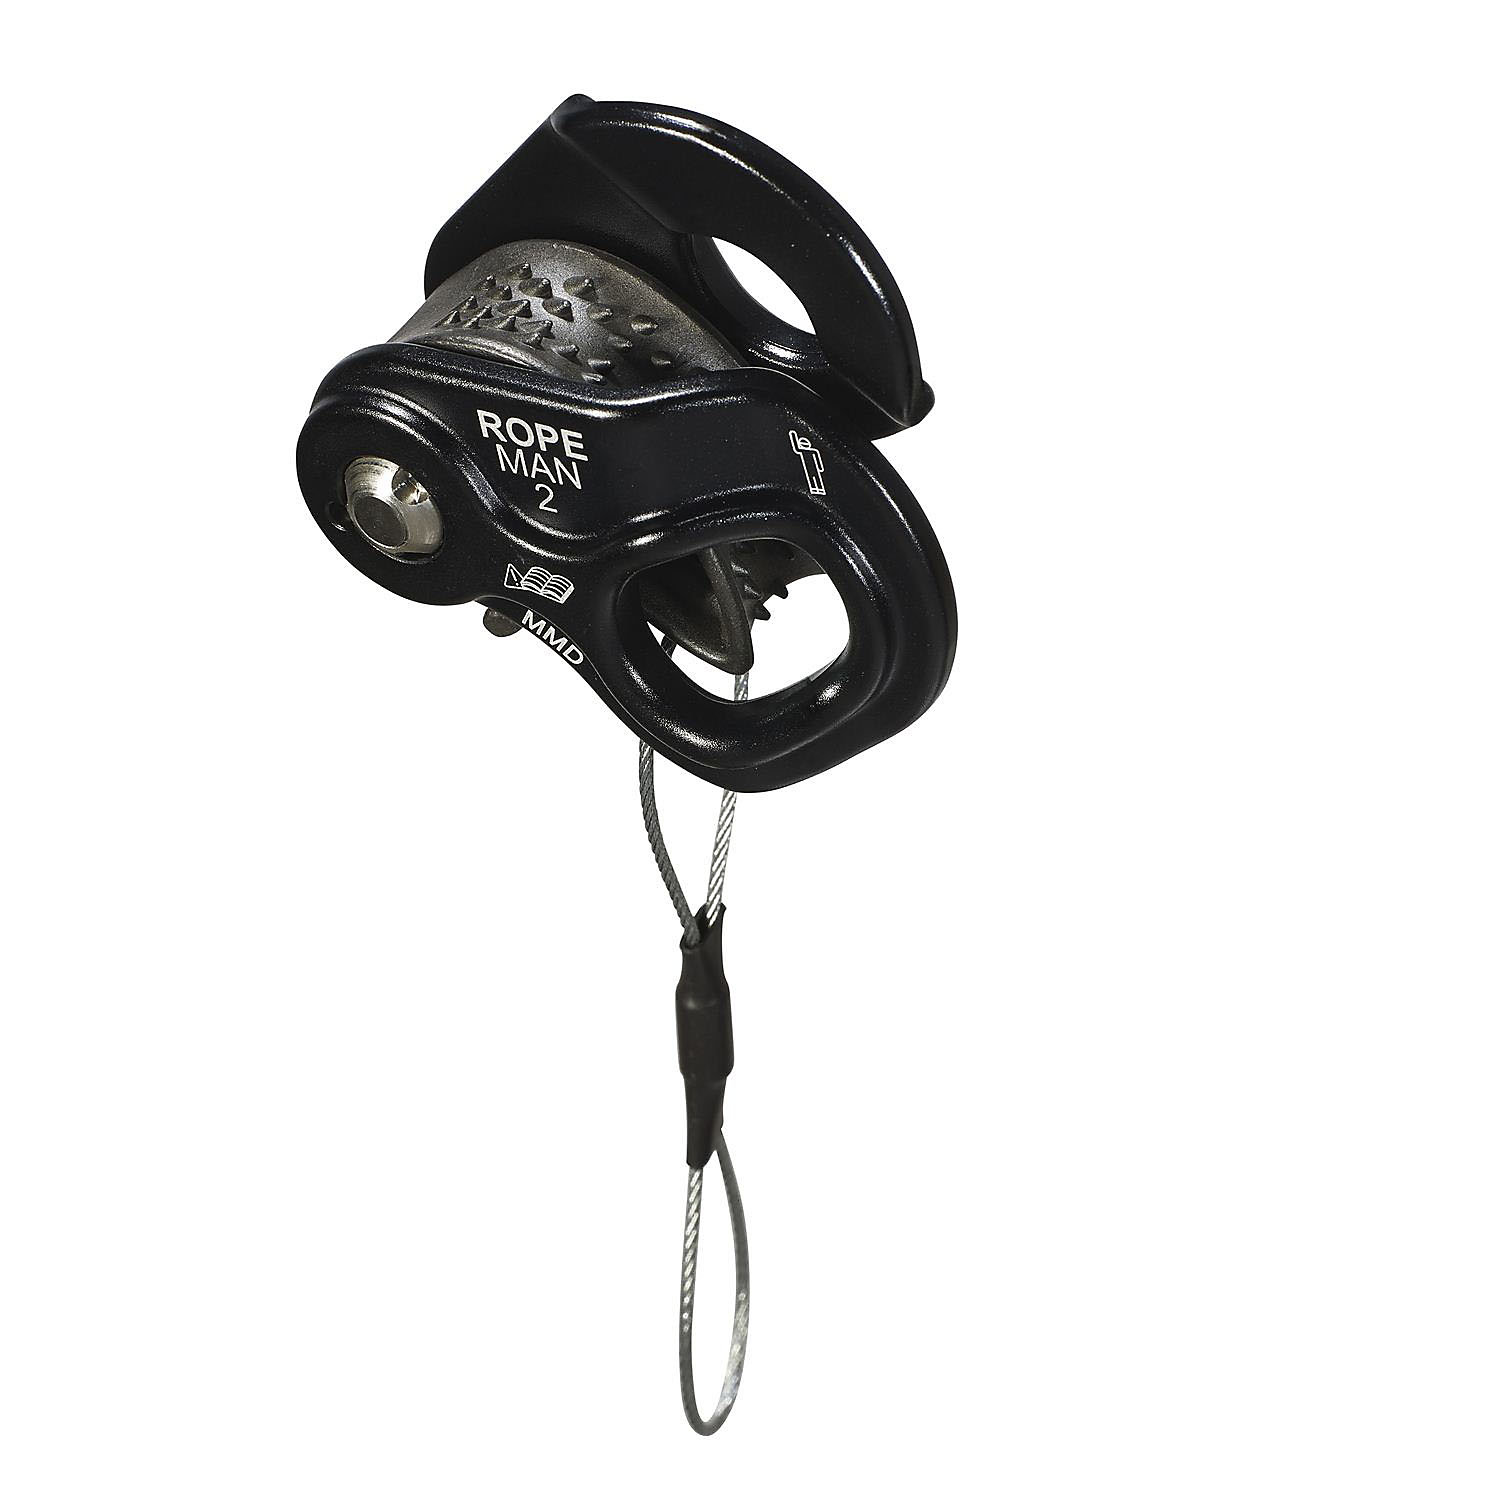 Wild Country Ropeman 2 Ascender